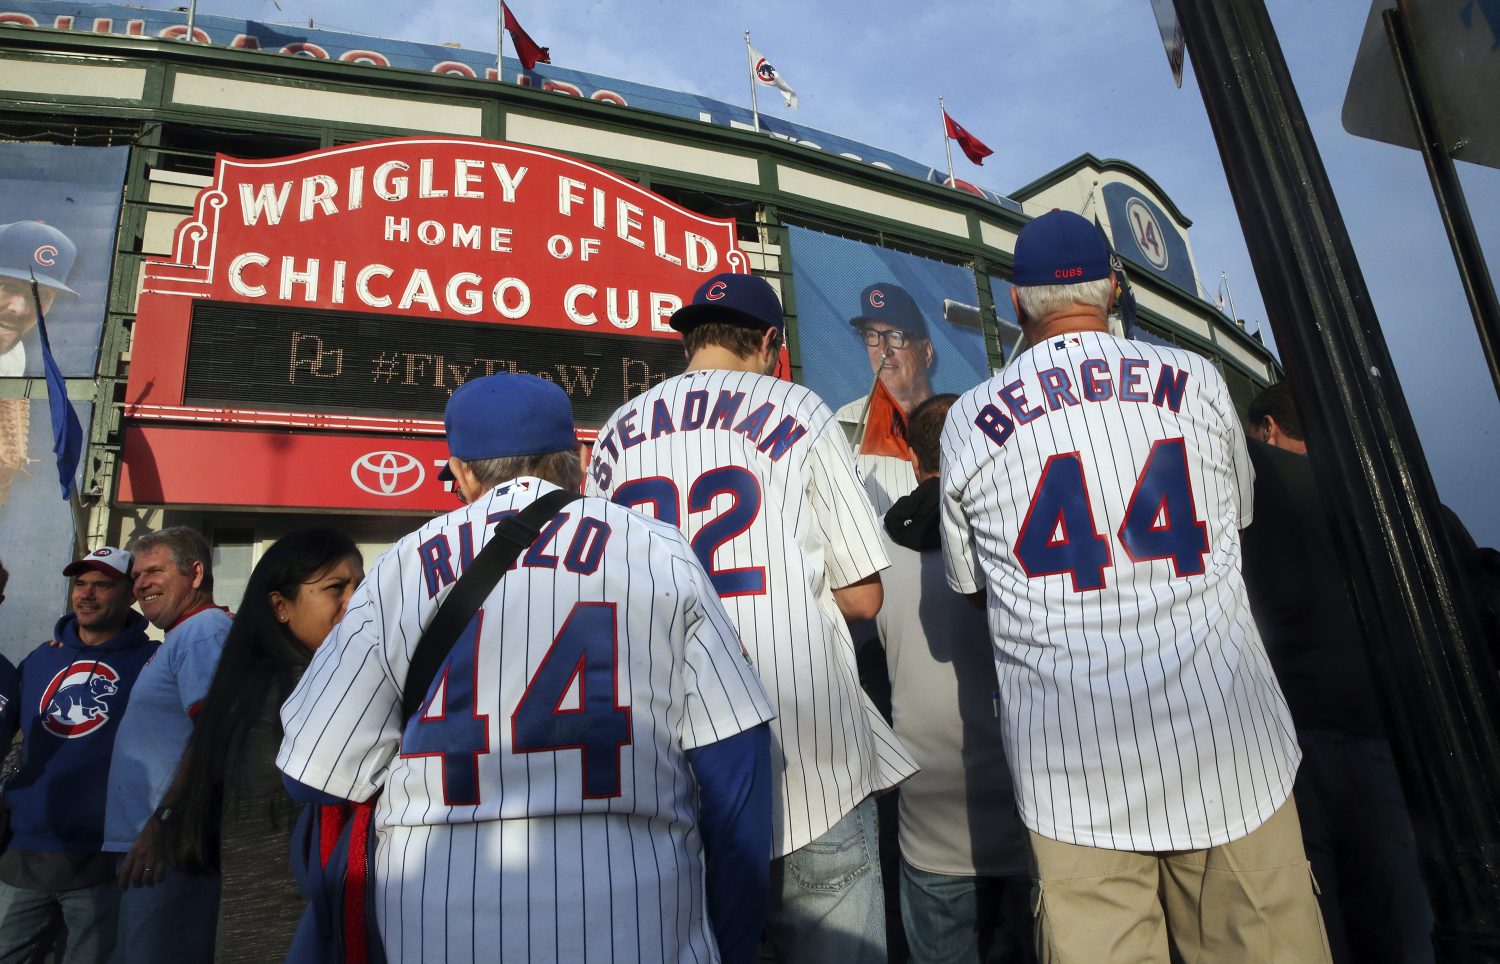 Fans+arrive+for+Game+4+of+the+NLCS+as+the+Chicago+Cubs+play+host+to+the+New+York+Mets+on+Wednesday%2C+Oct.+21%2C+2015%2C+at+Wrigley+Field+in+Chicago.+%28Nuccio+DiNuzzo%2FChicago+Tribune%2FTNS%29